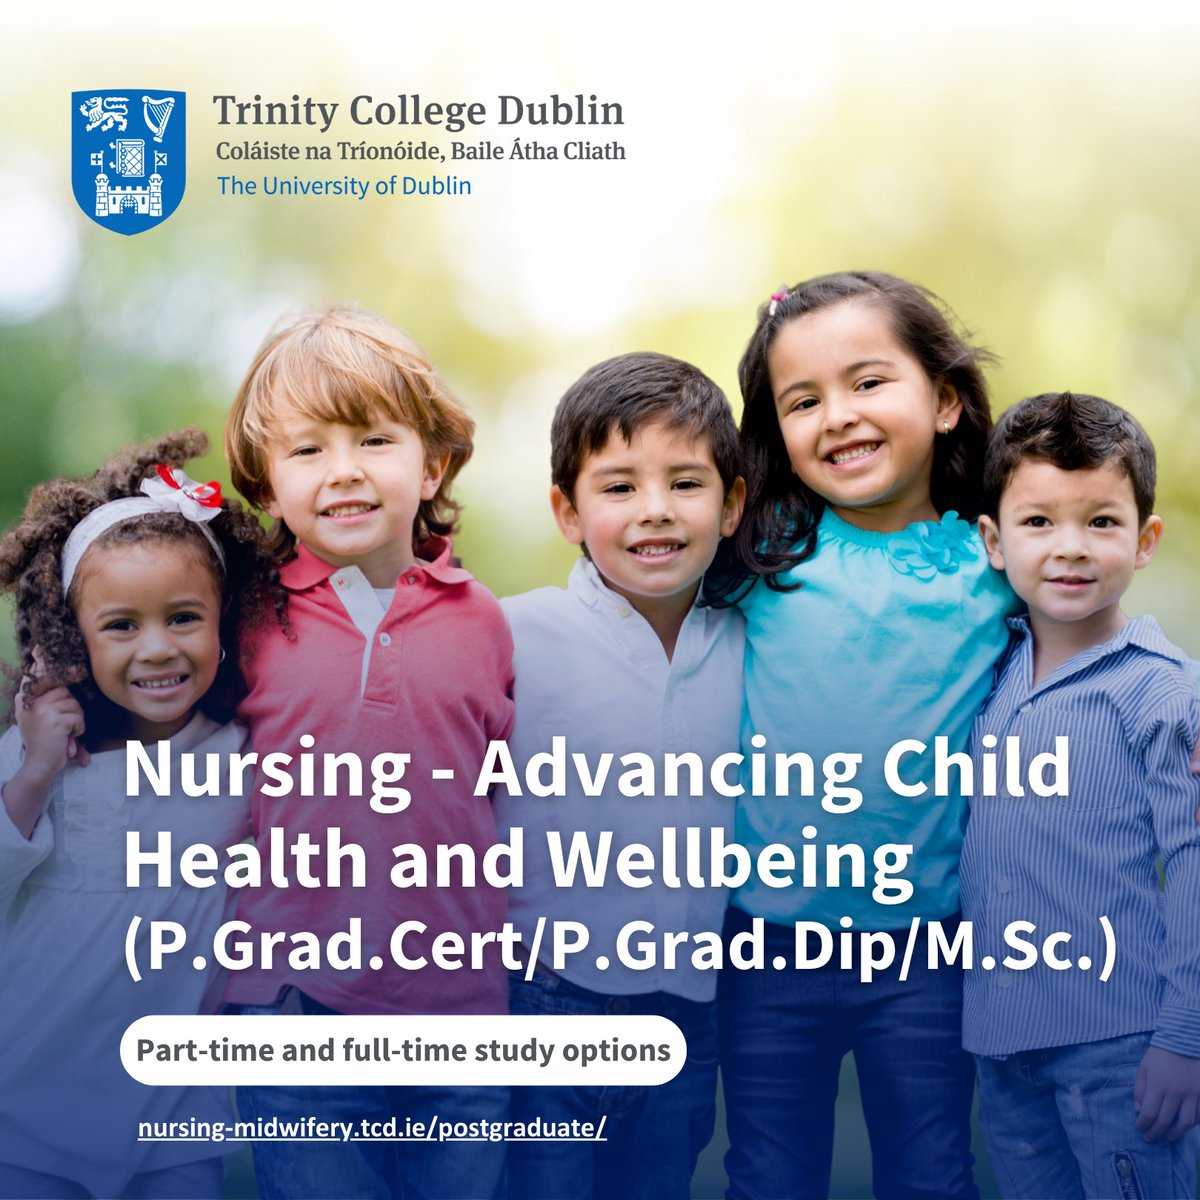 Discover our MSc Nursing - Advancing Child Health and Wellbeing. This course is designed for current registered nurses who wish to develop their knowledge in children’s health and child wellbeing. Find out more and apply: tcd.ie/courses/postgr…